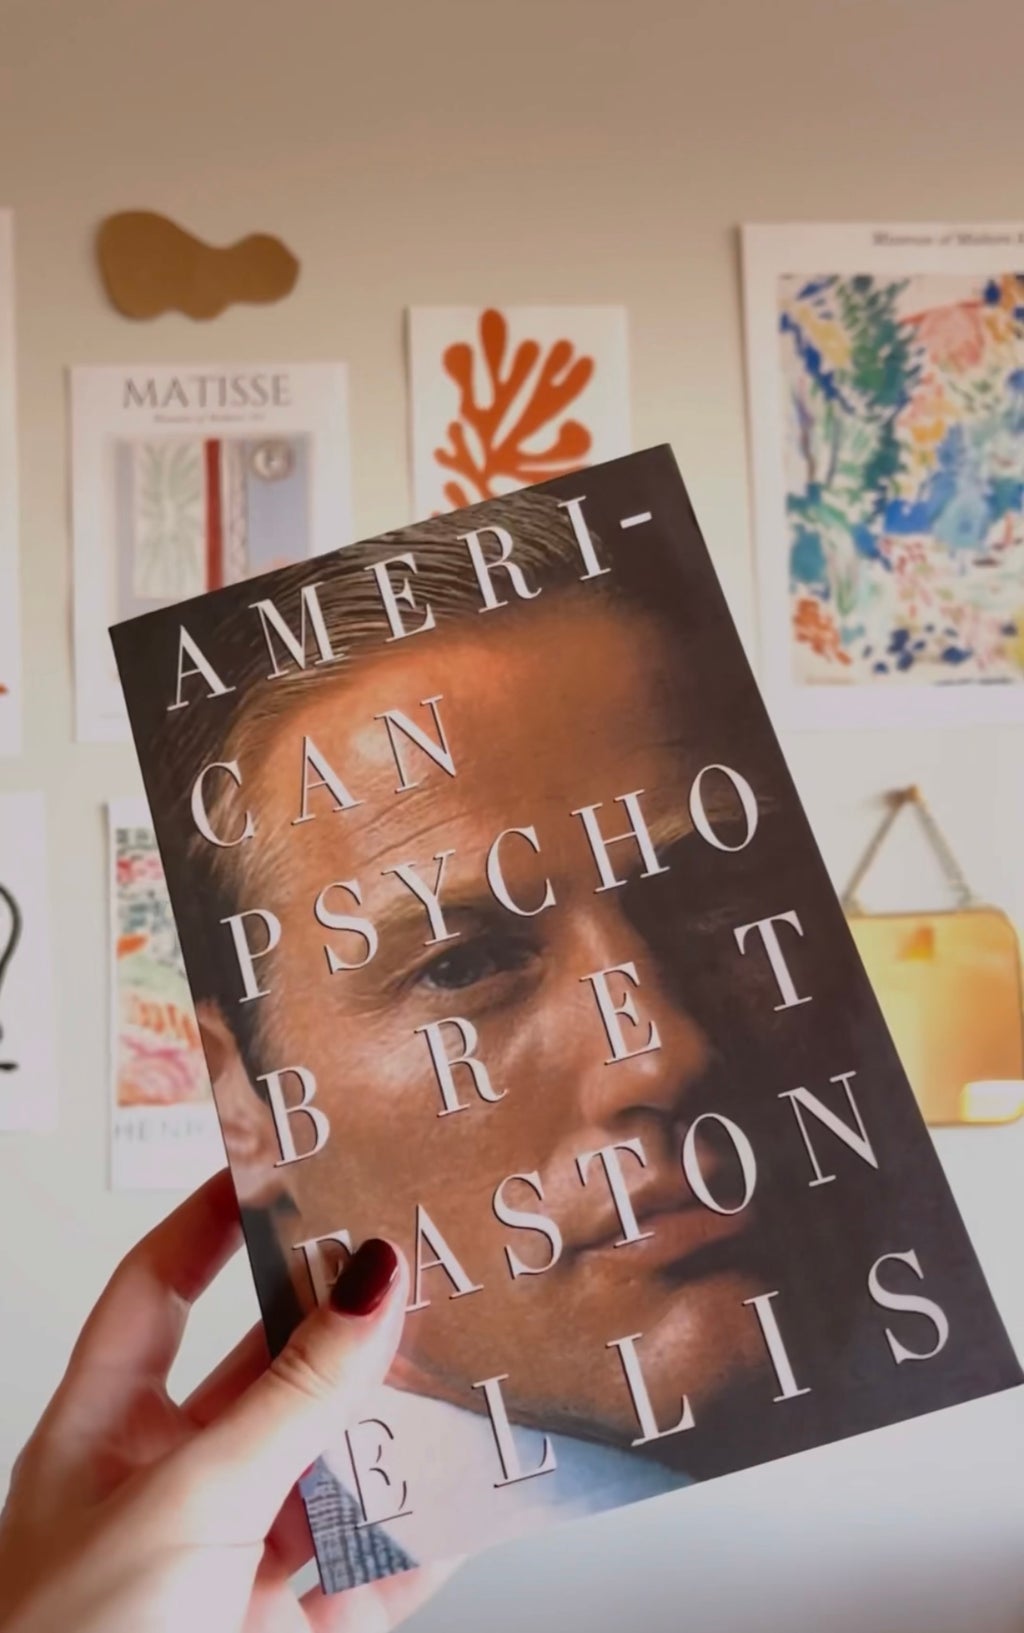 Photo of hand holding a book. American psycho.